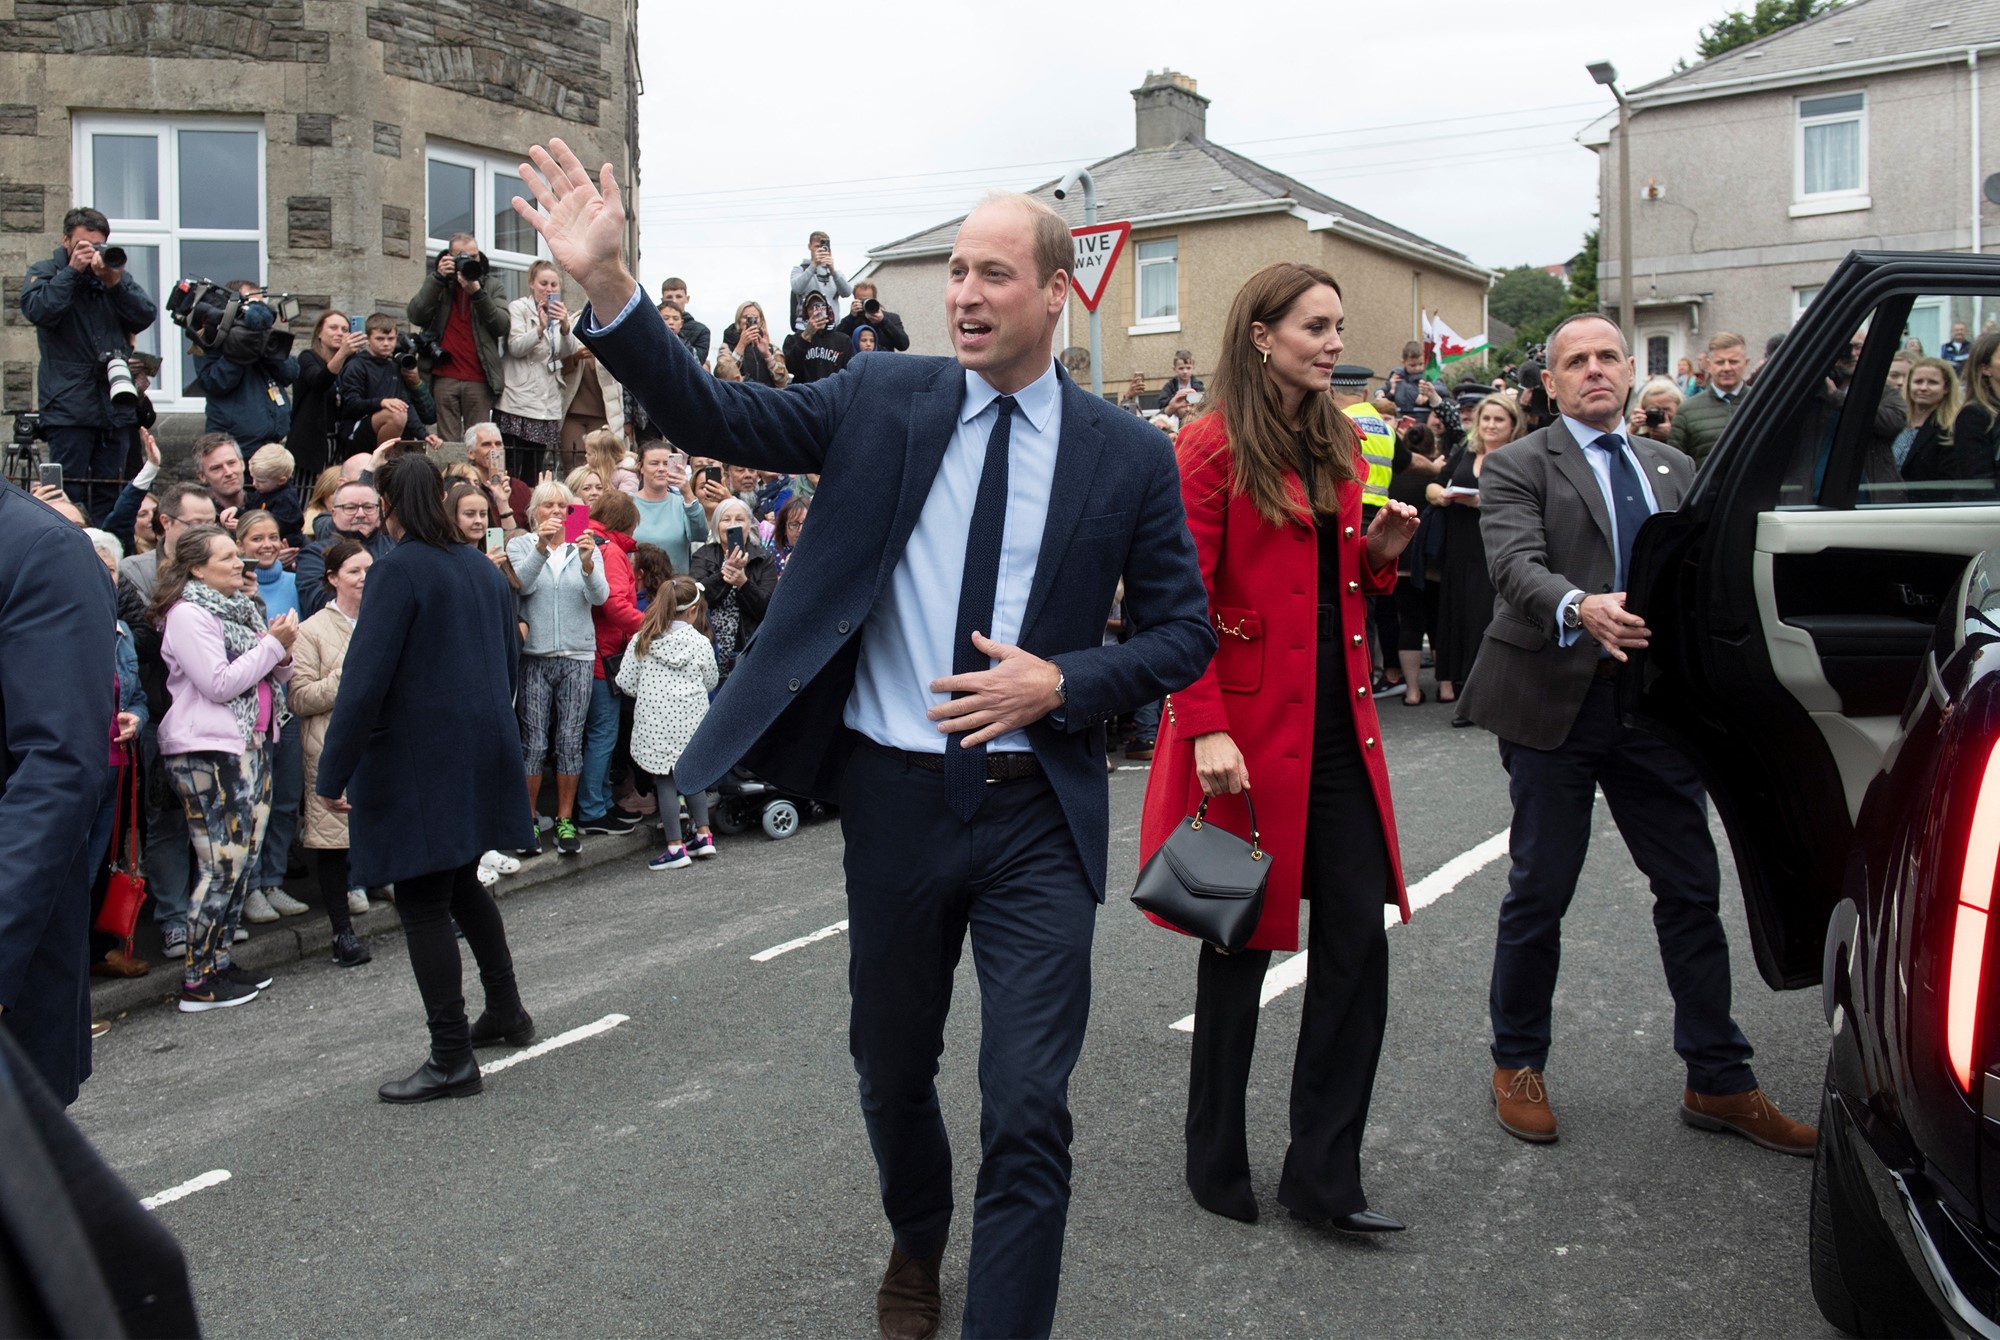 Prince William waves at crowds with Princess Catherine beside him